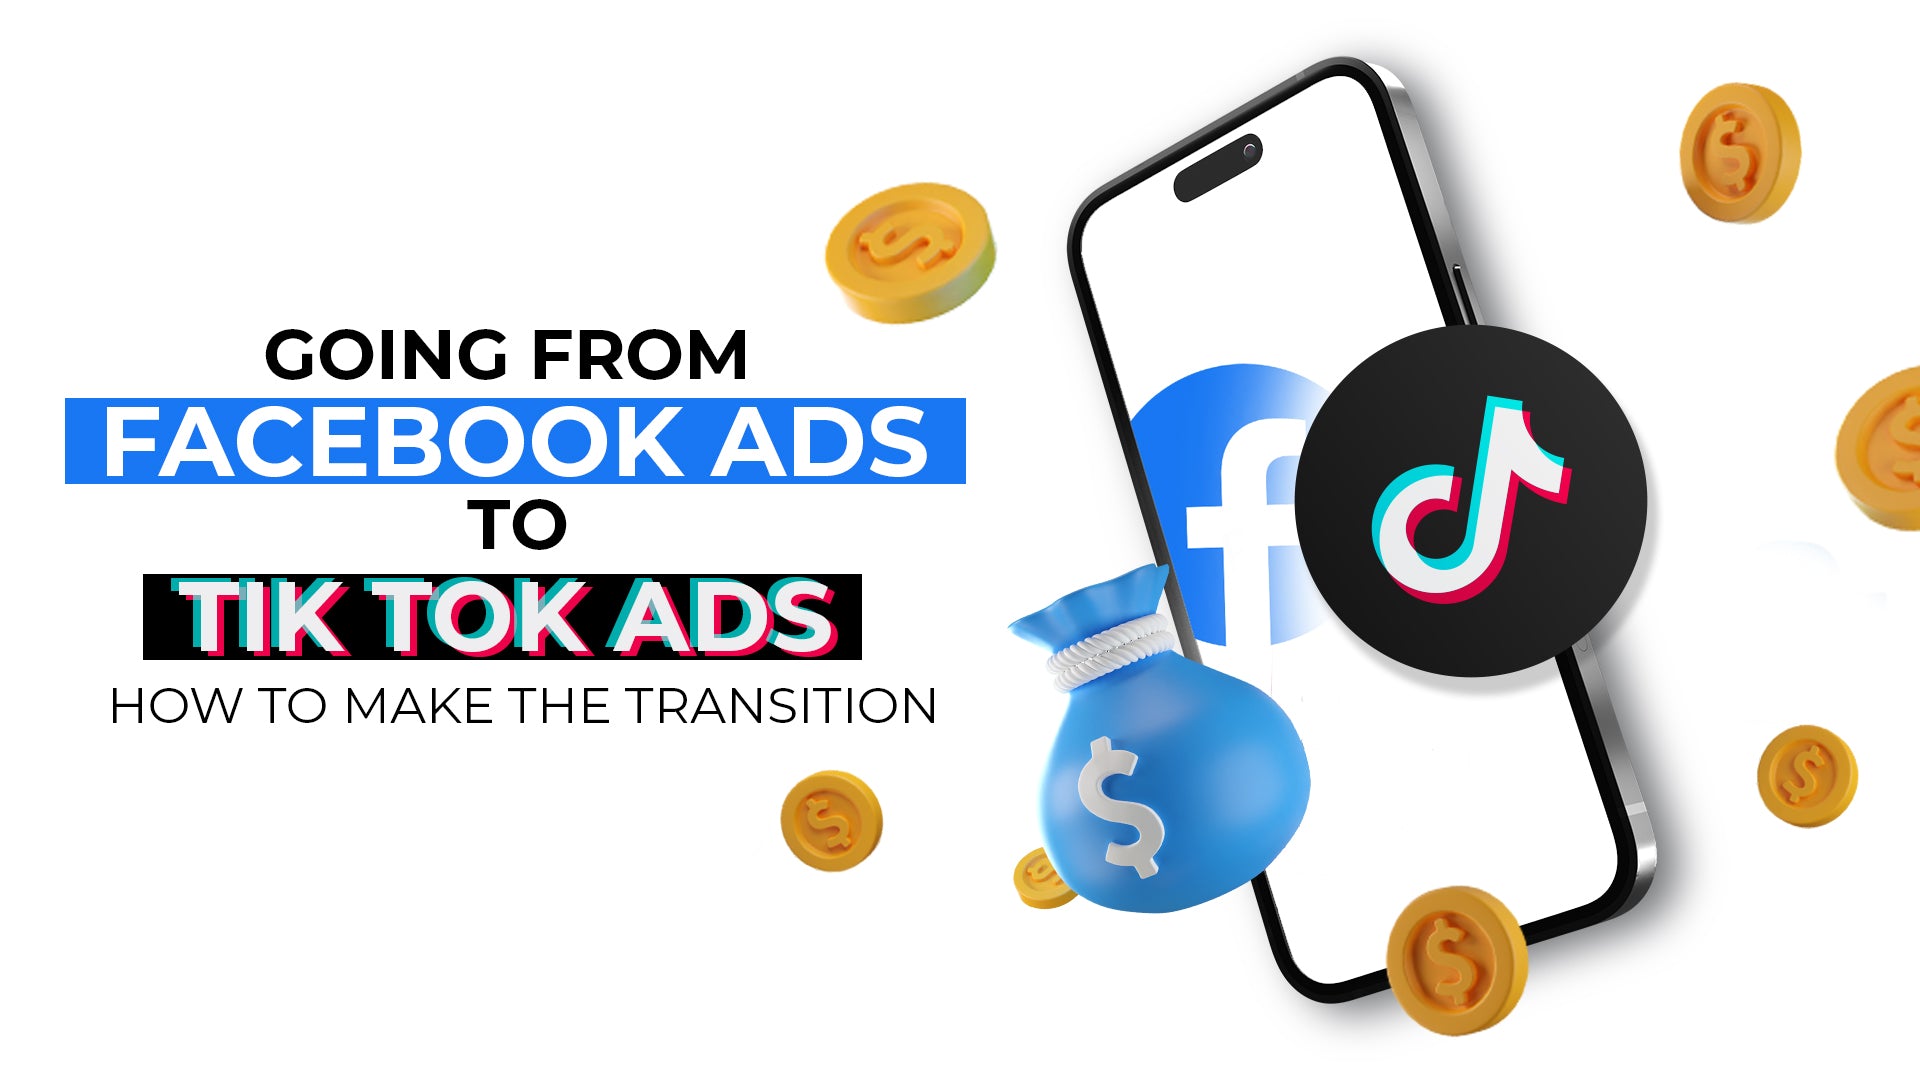 GOING FROM FACEBOOK ADS TO TIK TOK ADS - HOW TO MAKE THE TRANSITION